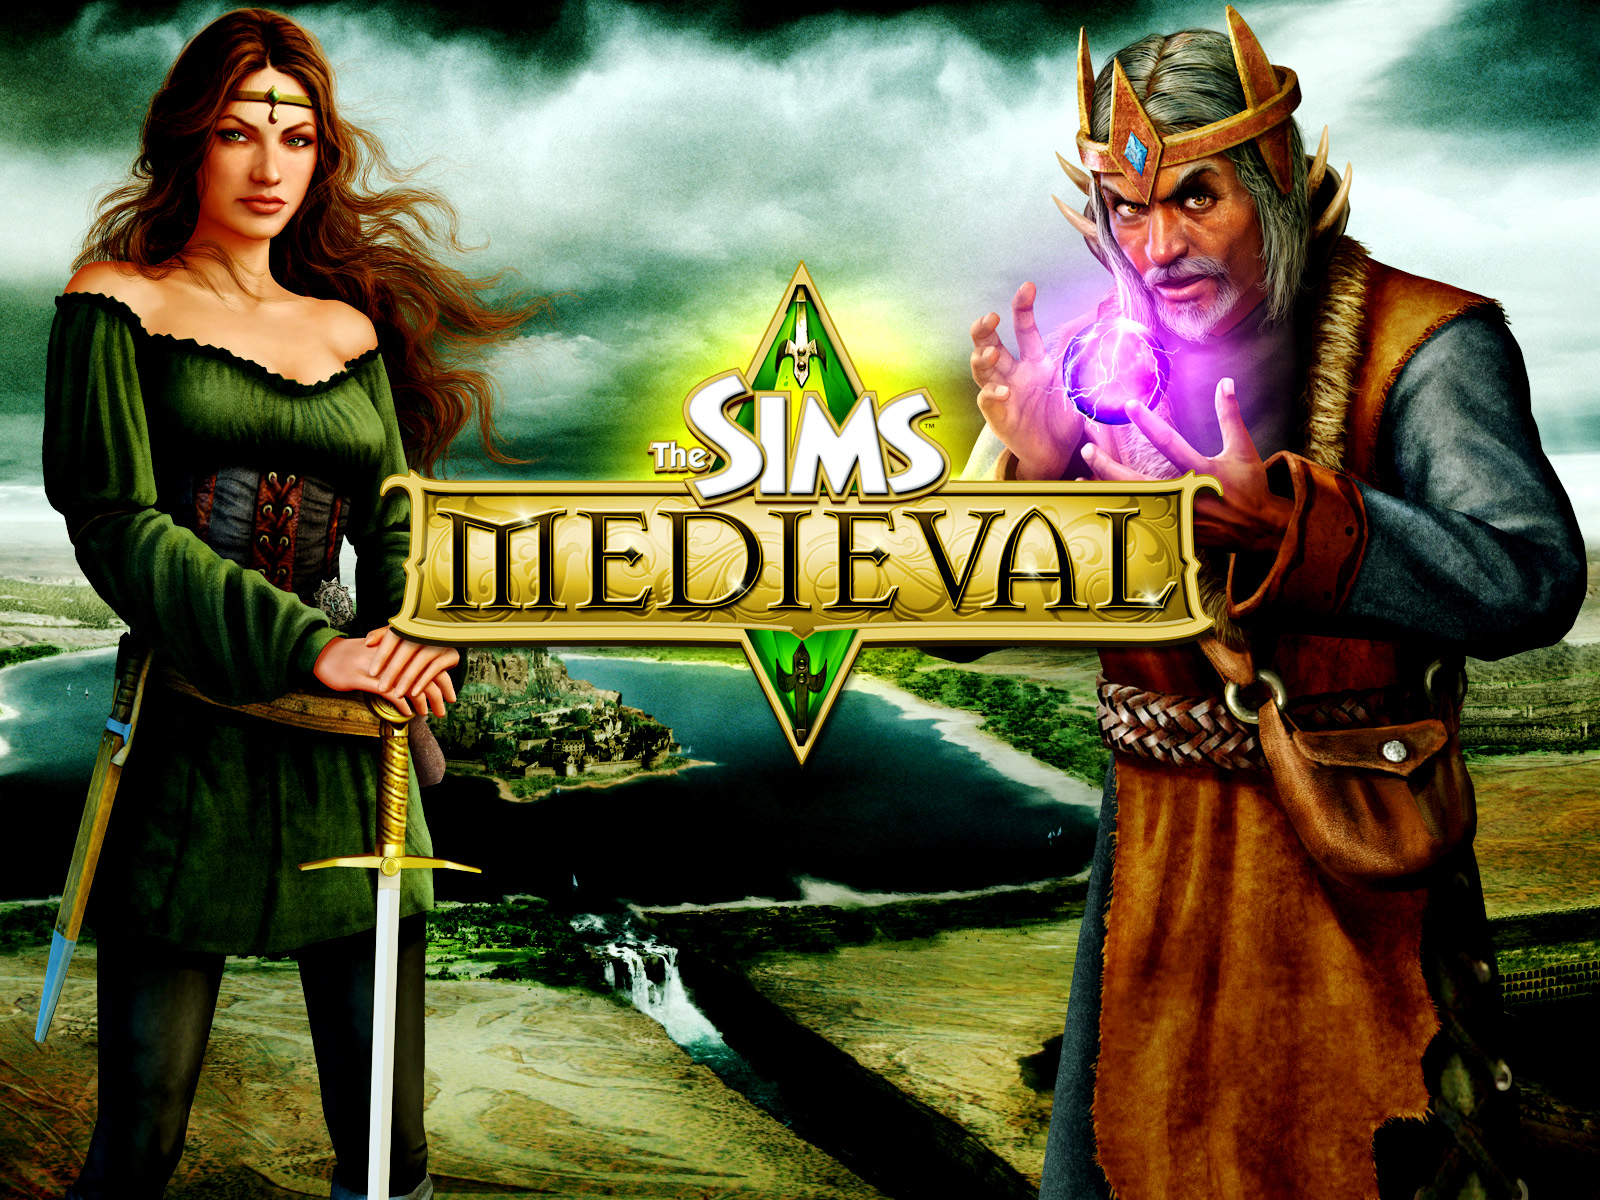 The Sims Medieval HD Wallpaper Hq